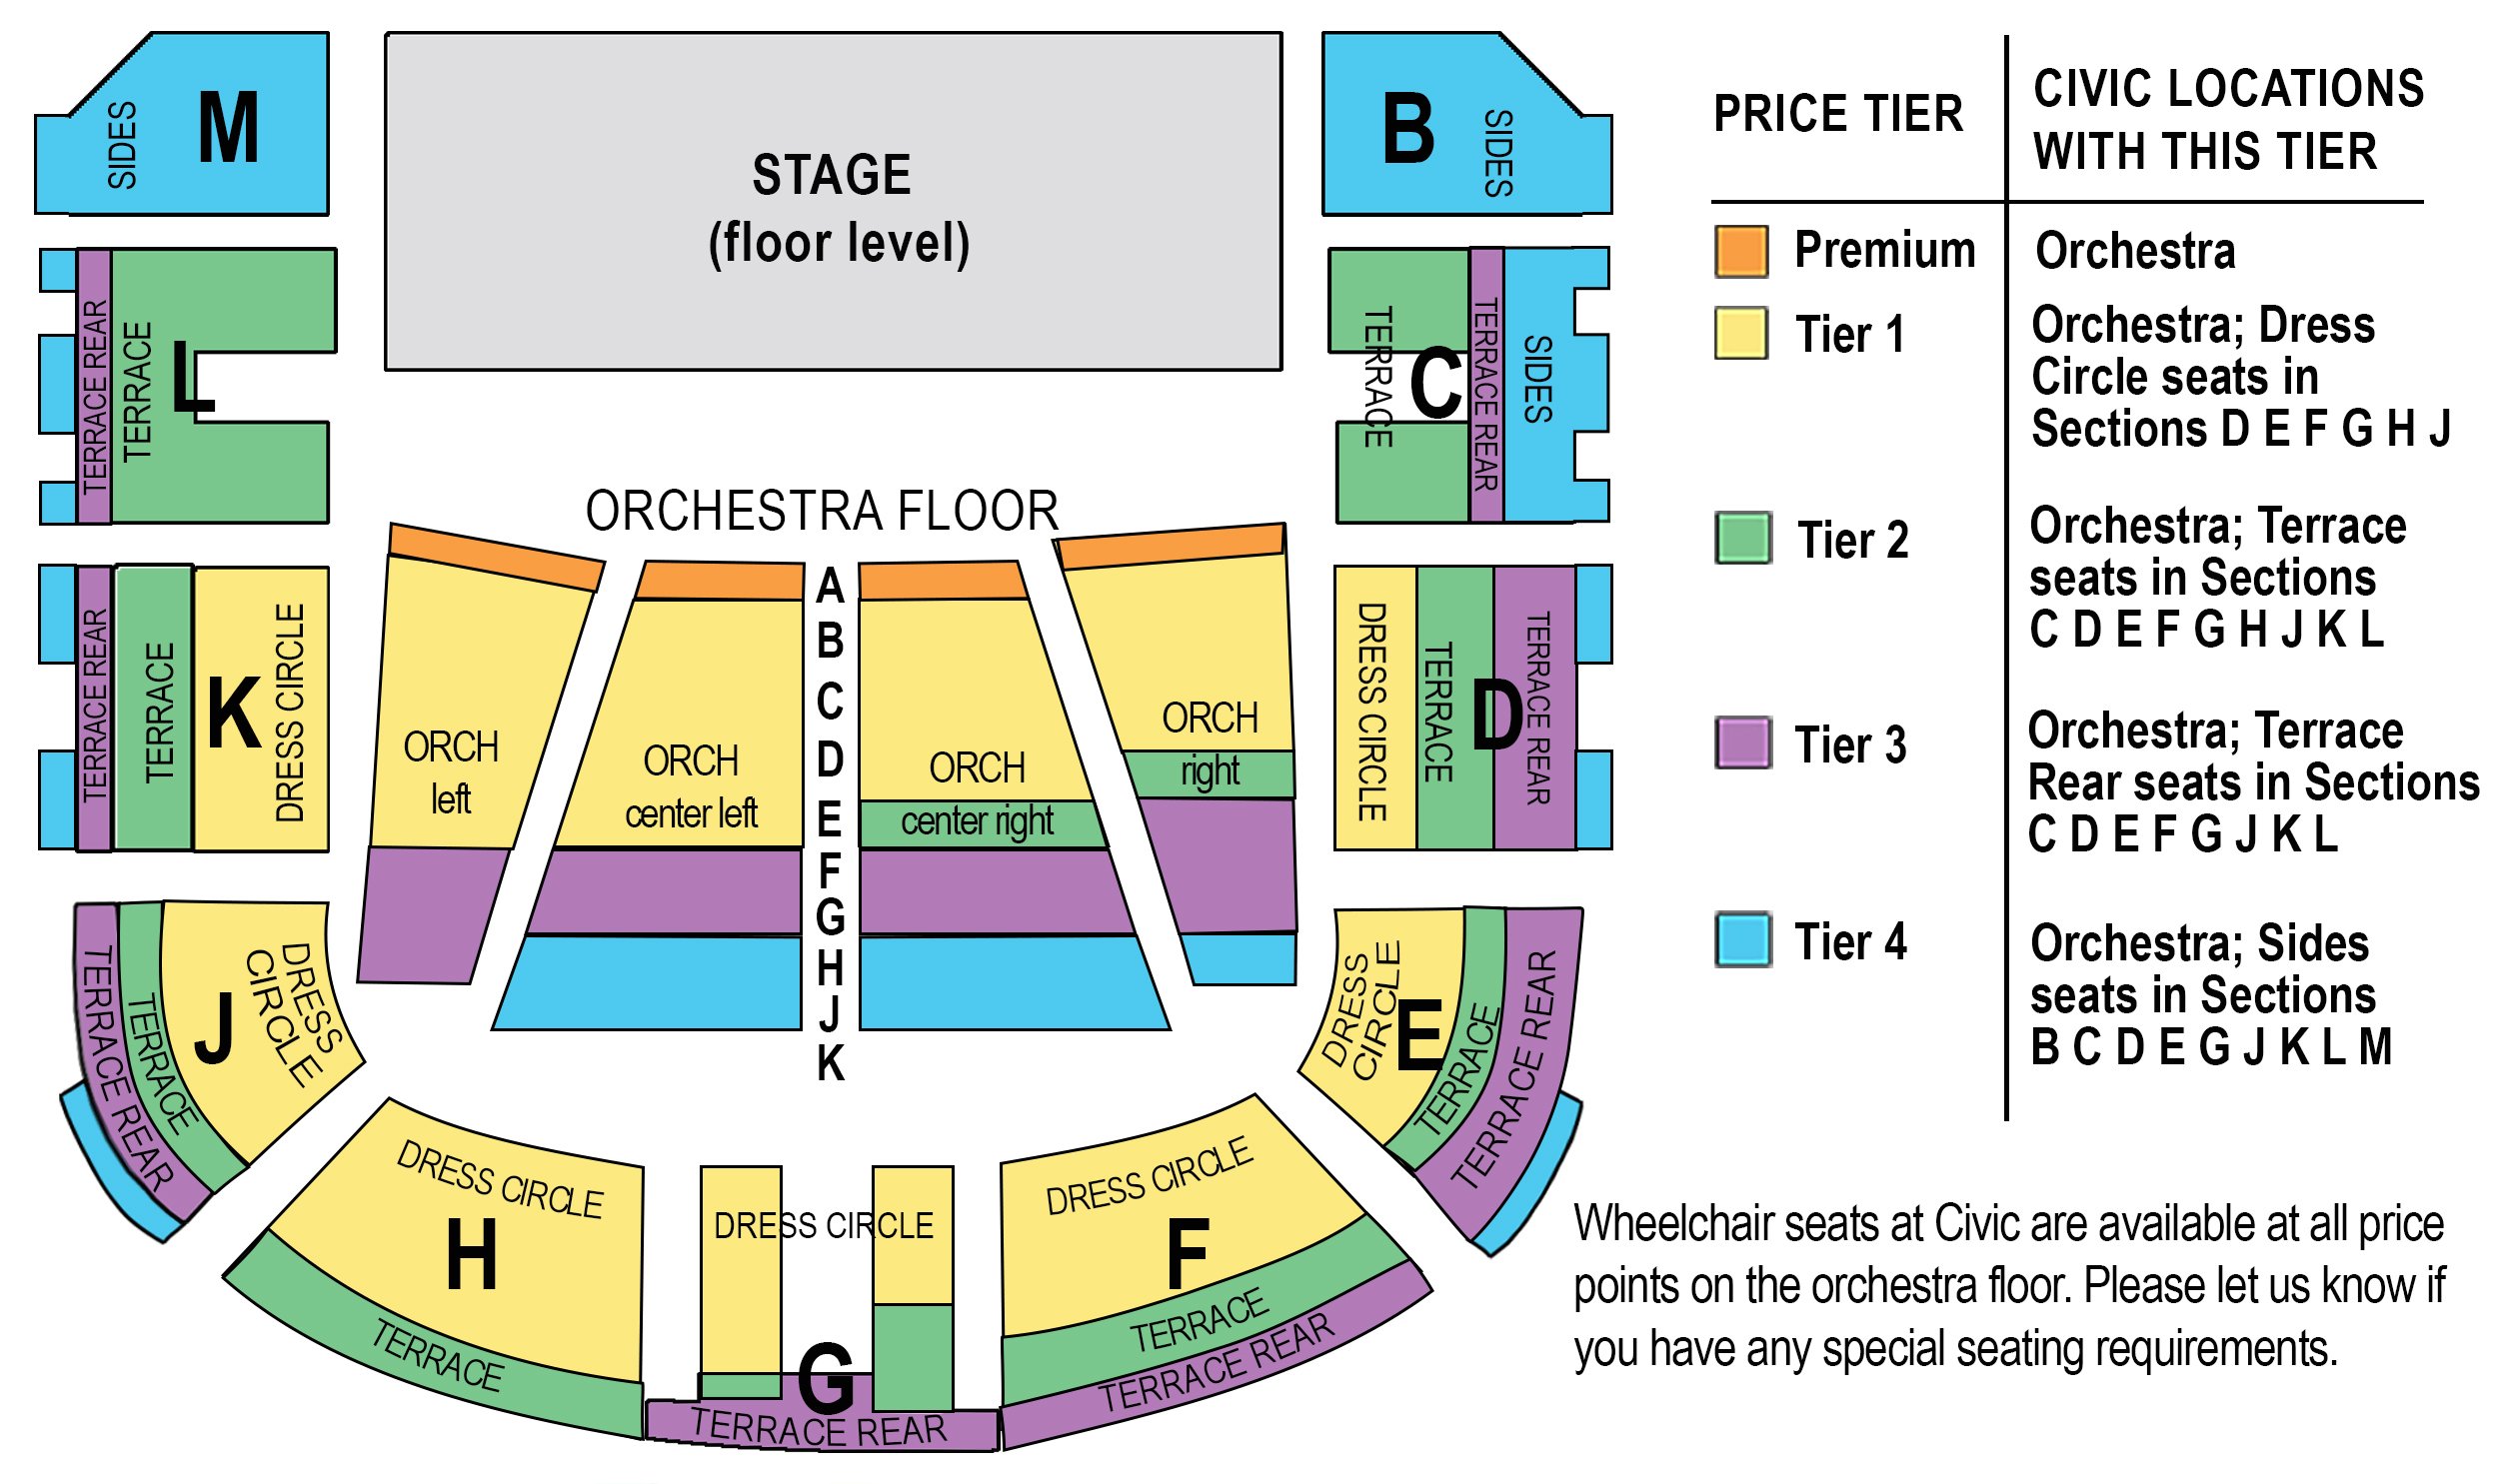 Seat maps and accessibility - Dallas Symphony Orchestra